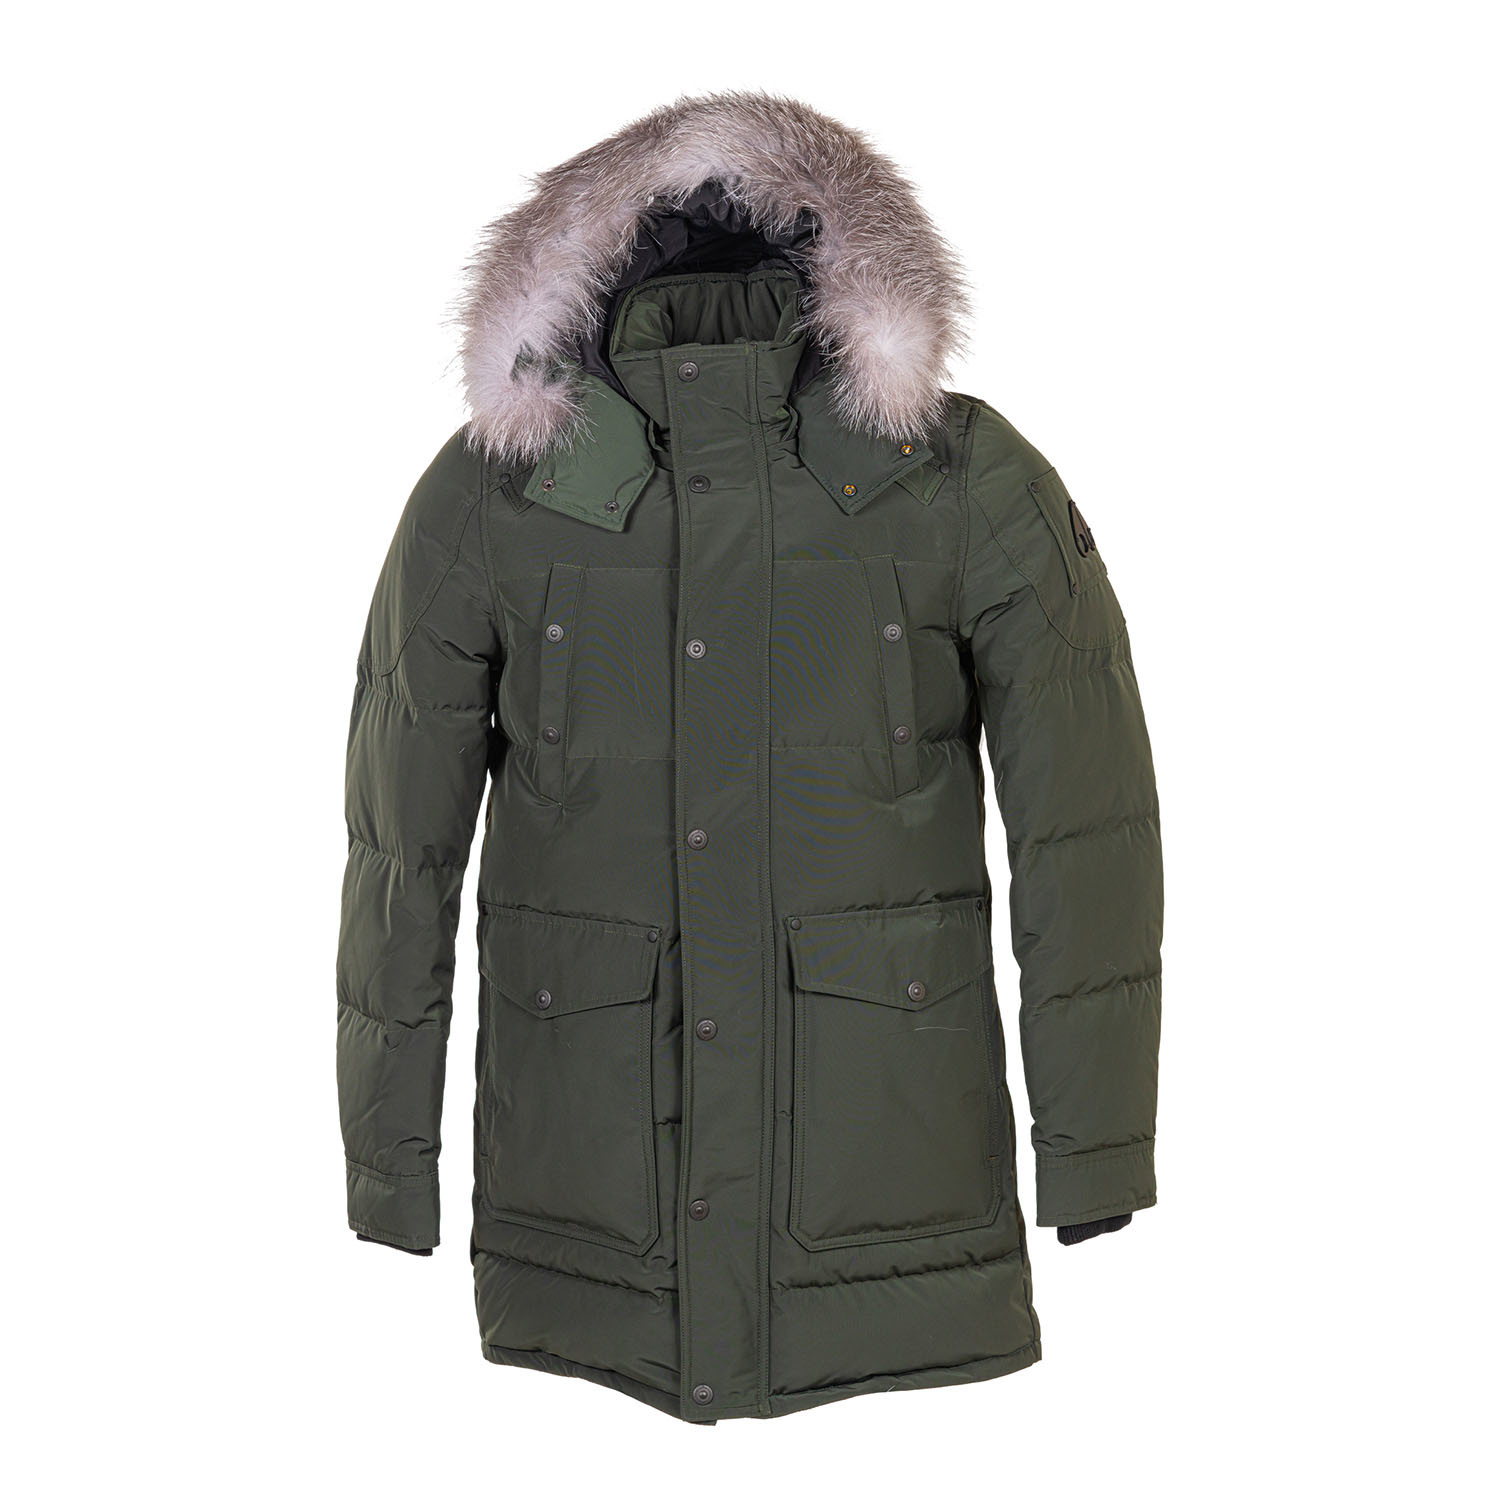 Men's West Gore Parka Canadian Army Jacket + Frost Fox // Green + Gray ...